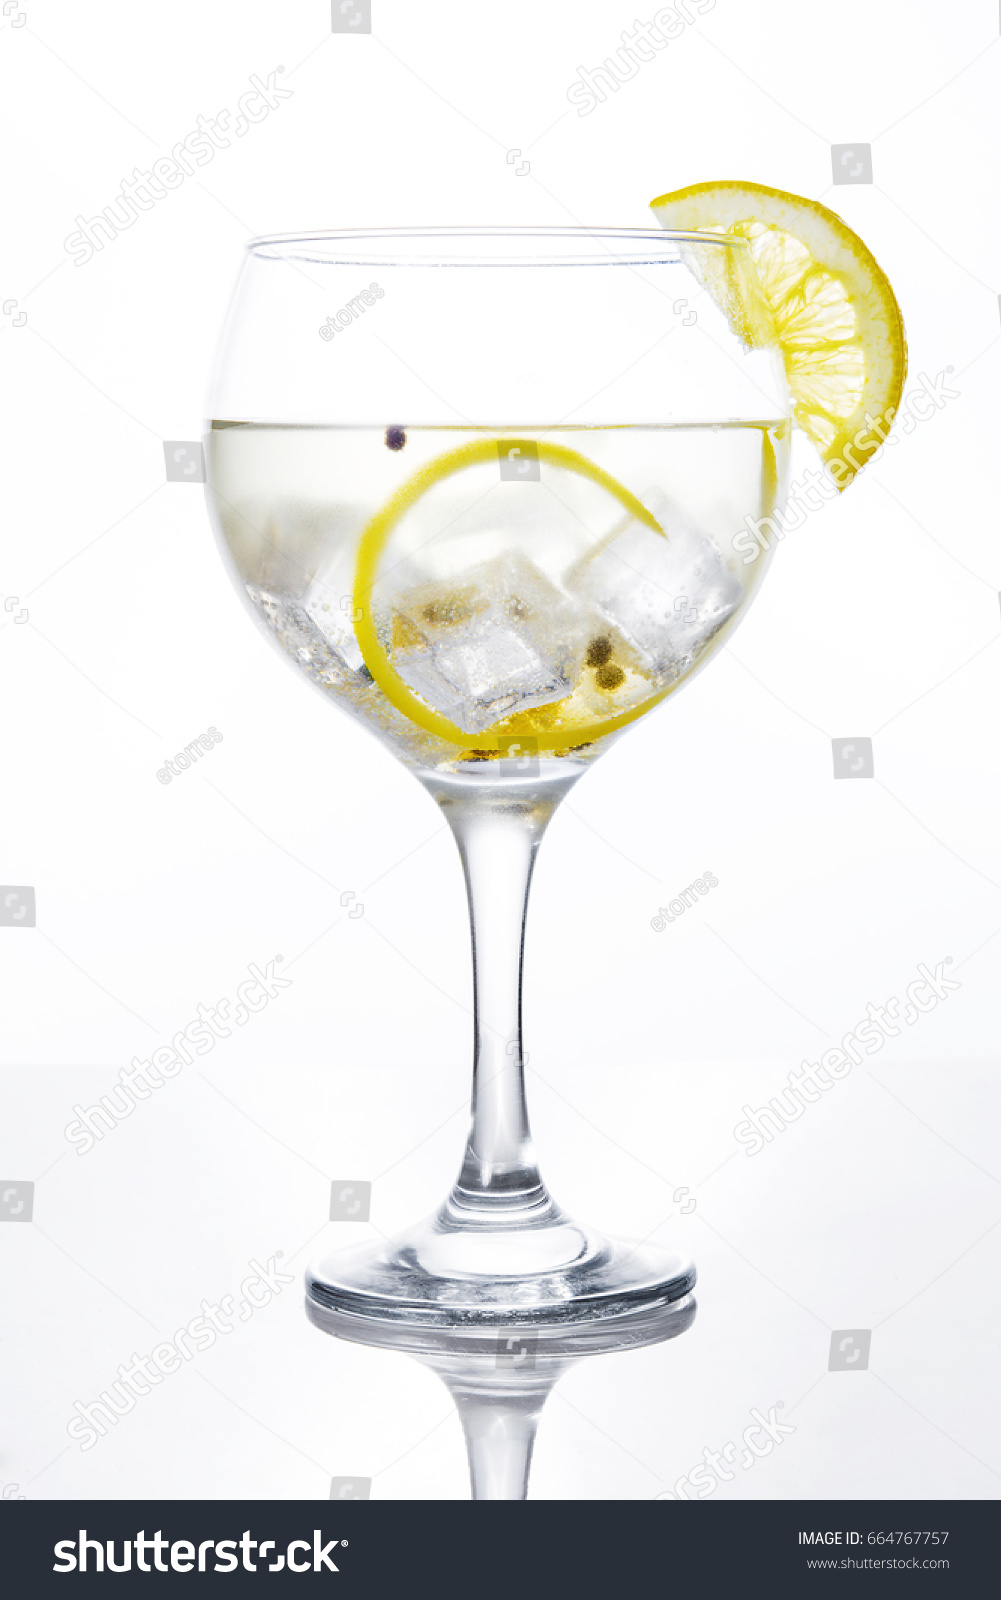 Glass of gin tonic with lemon on white background #664767757